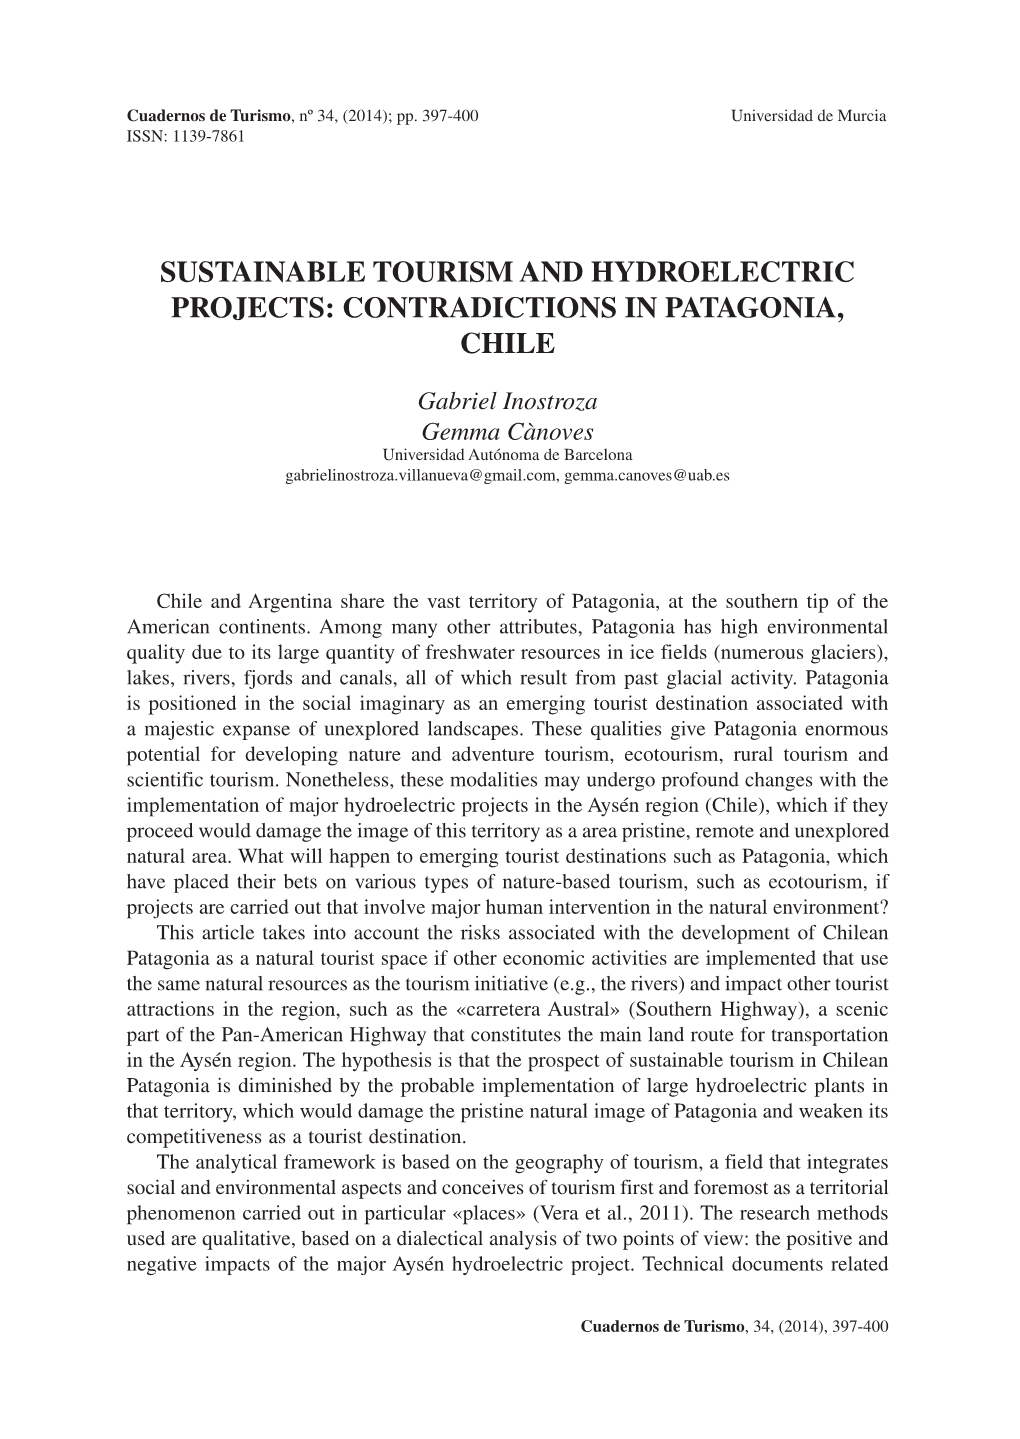 Sustainable Tourism and Hydroelectric Projects: Contradictions in Patagonia, Chile